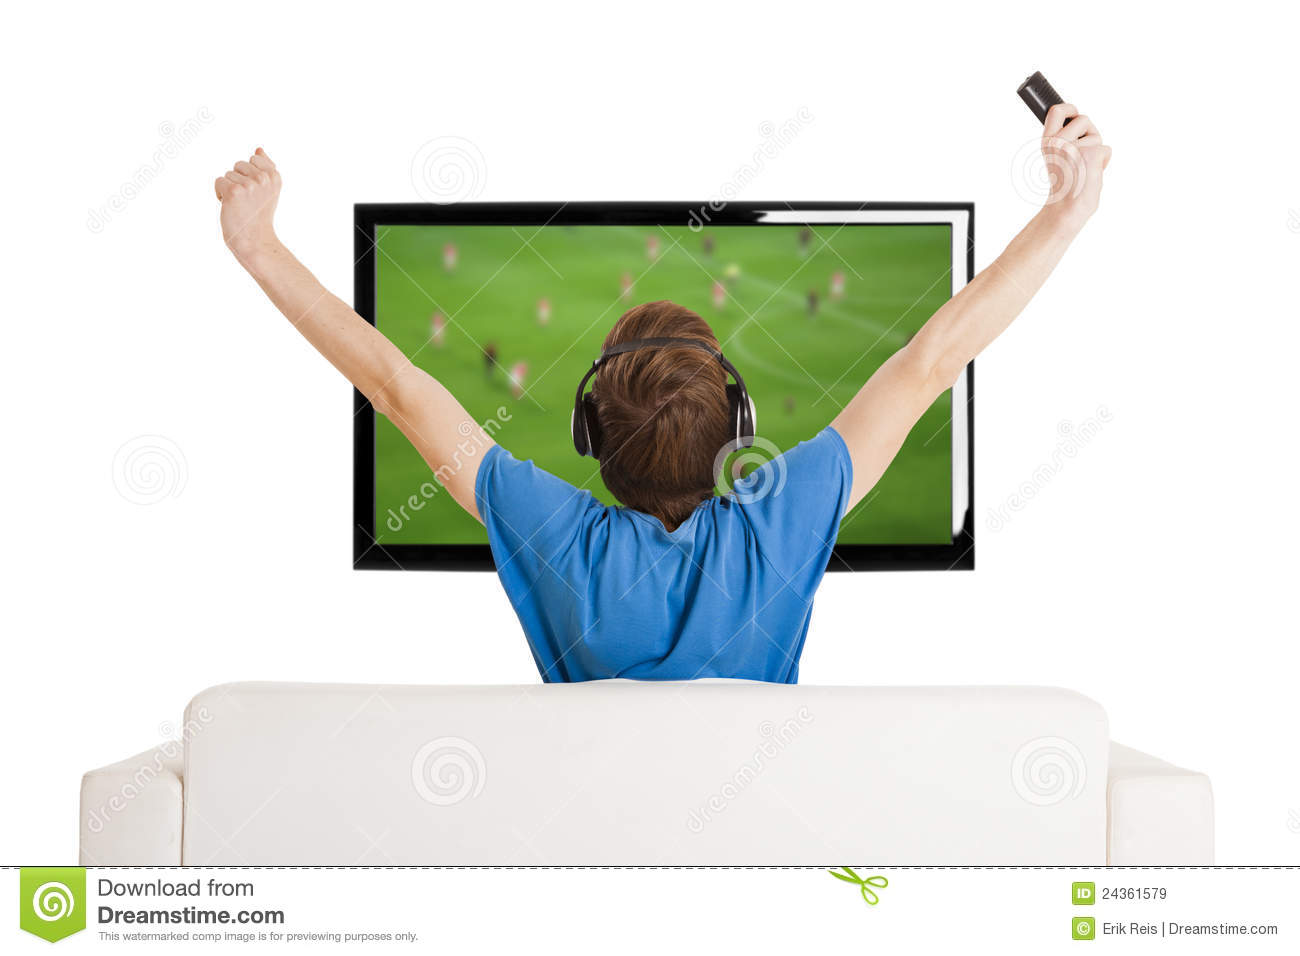 Watching Football On Tv Royalty Free Stock Images   Image  24361579